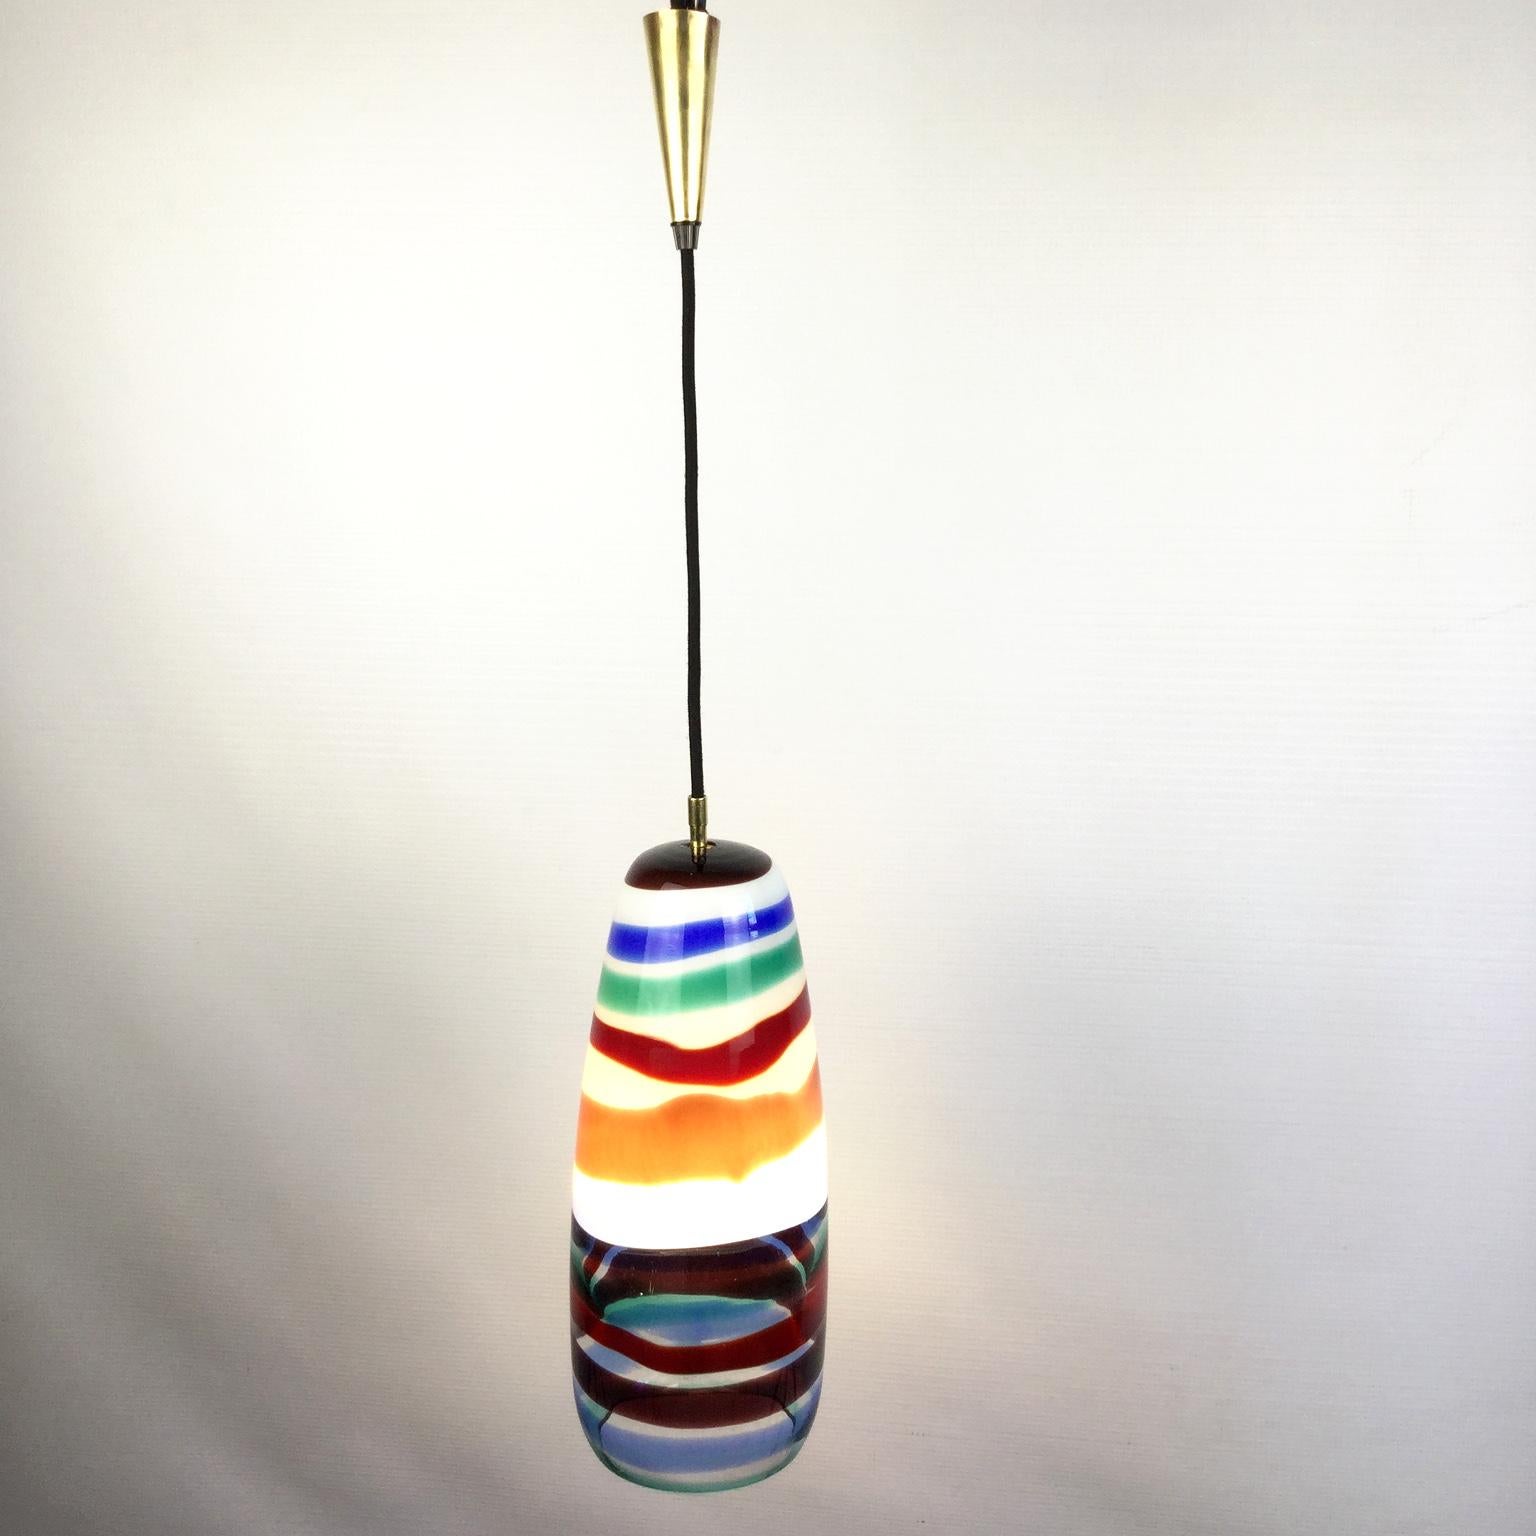 Opaline glass pendant lamp with colored bands also known as the 